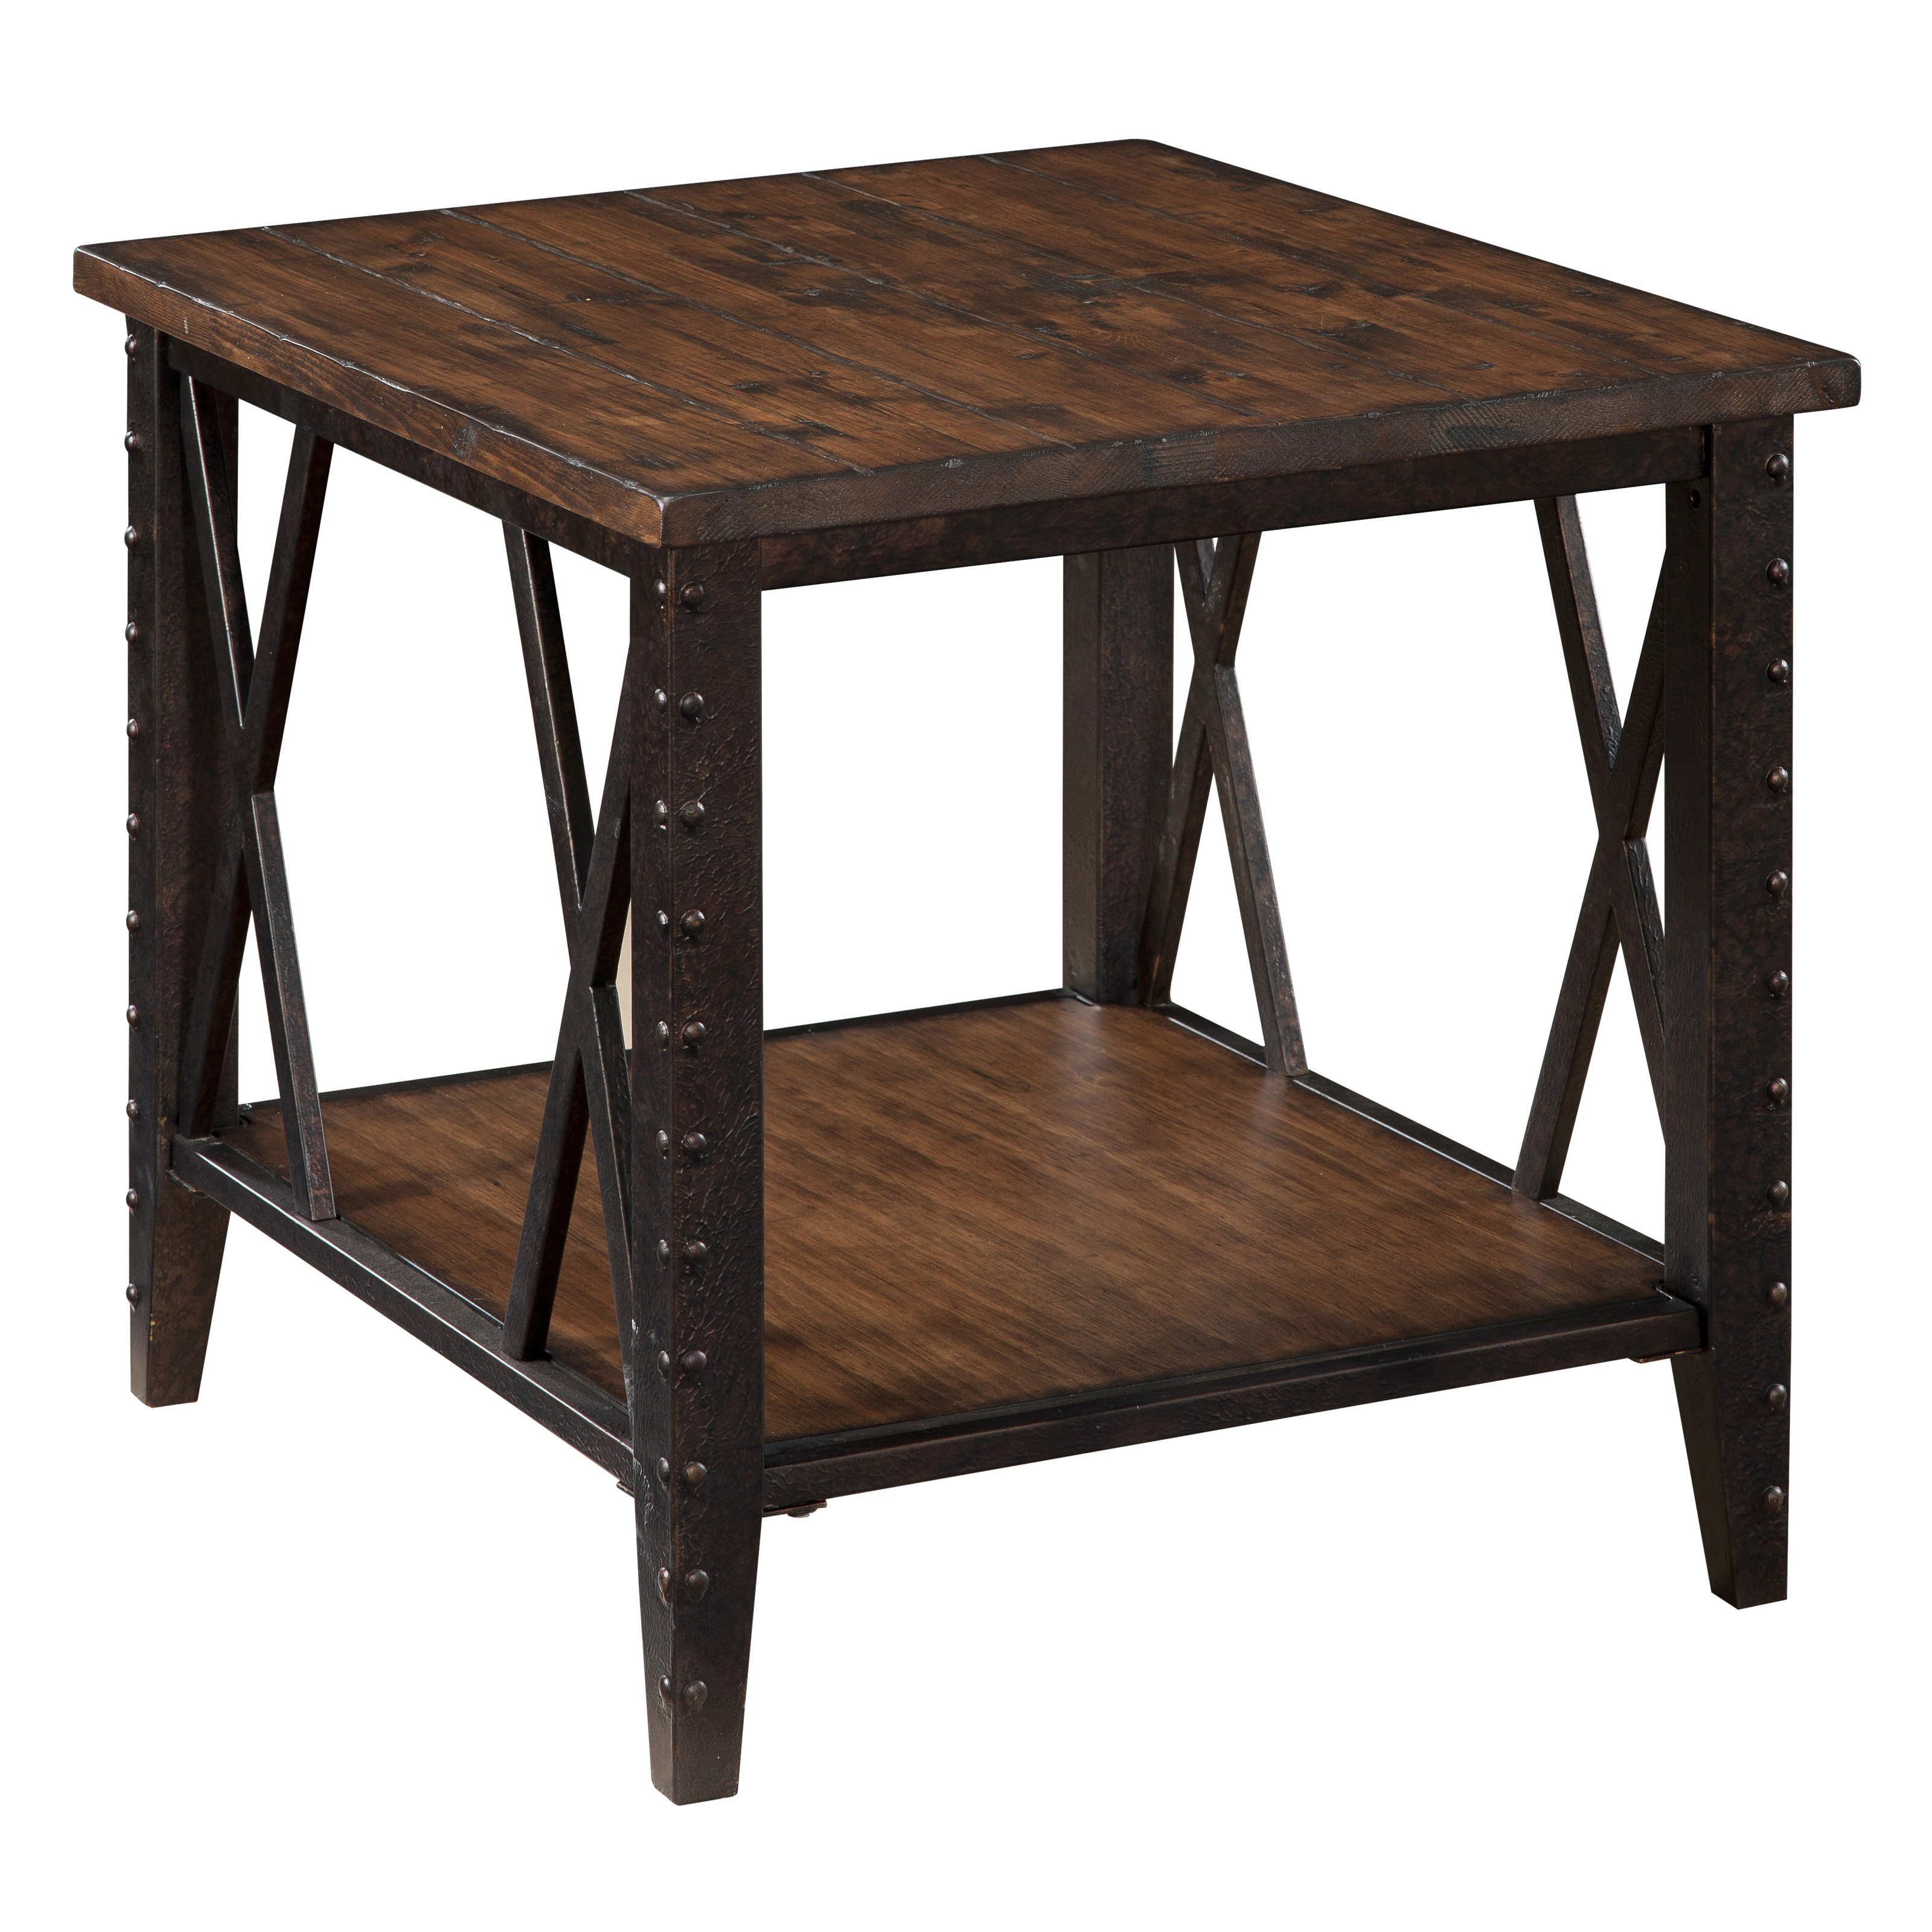 probably terrific awesome end table wood metal ture mira road magnussen fleming rectangle rustic pine and master jysk ott luxury round dining christmas linen tablecloth